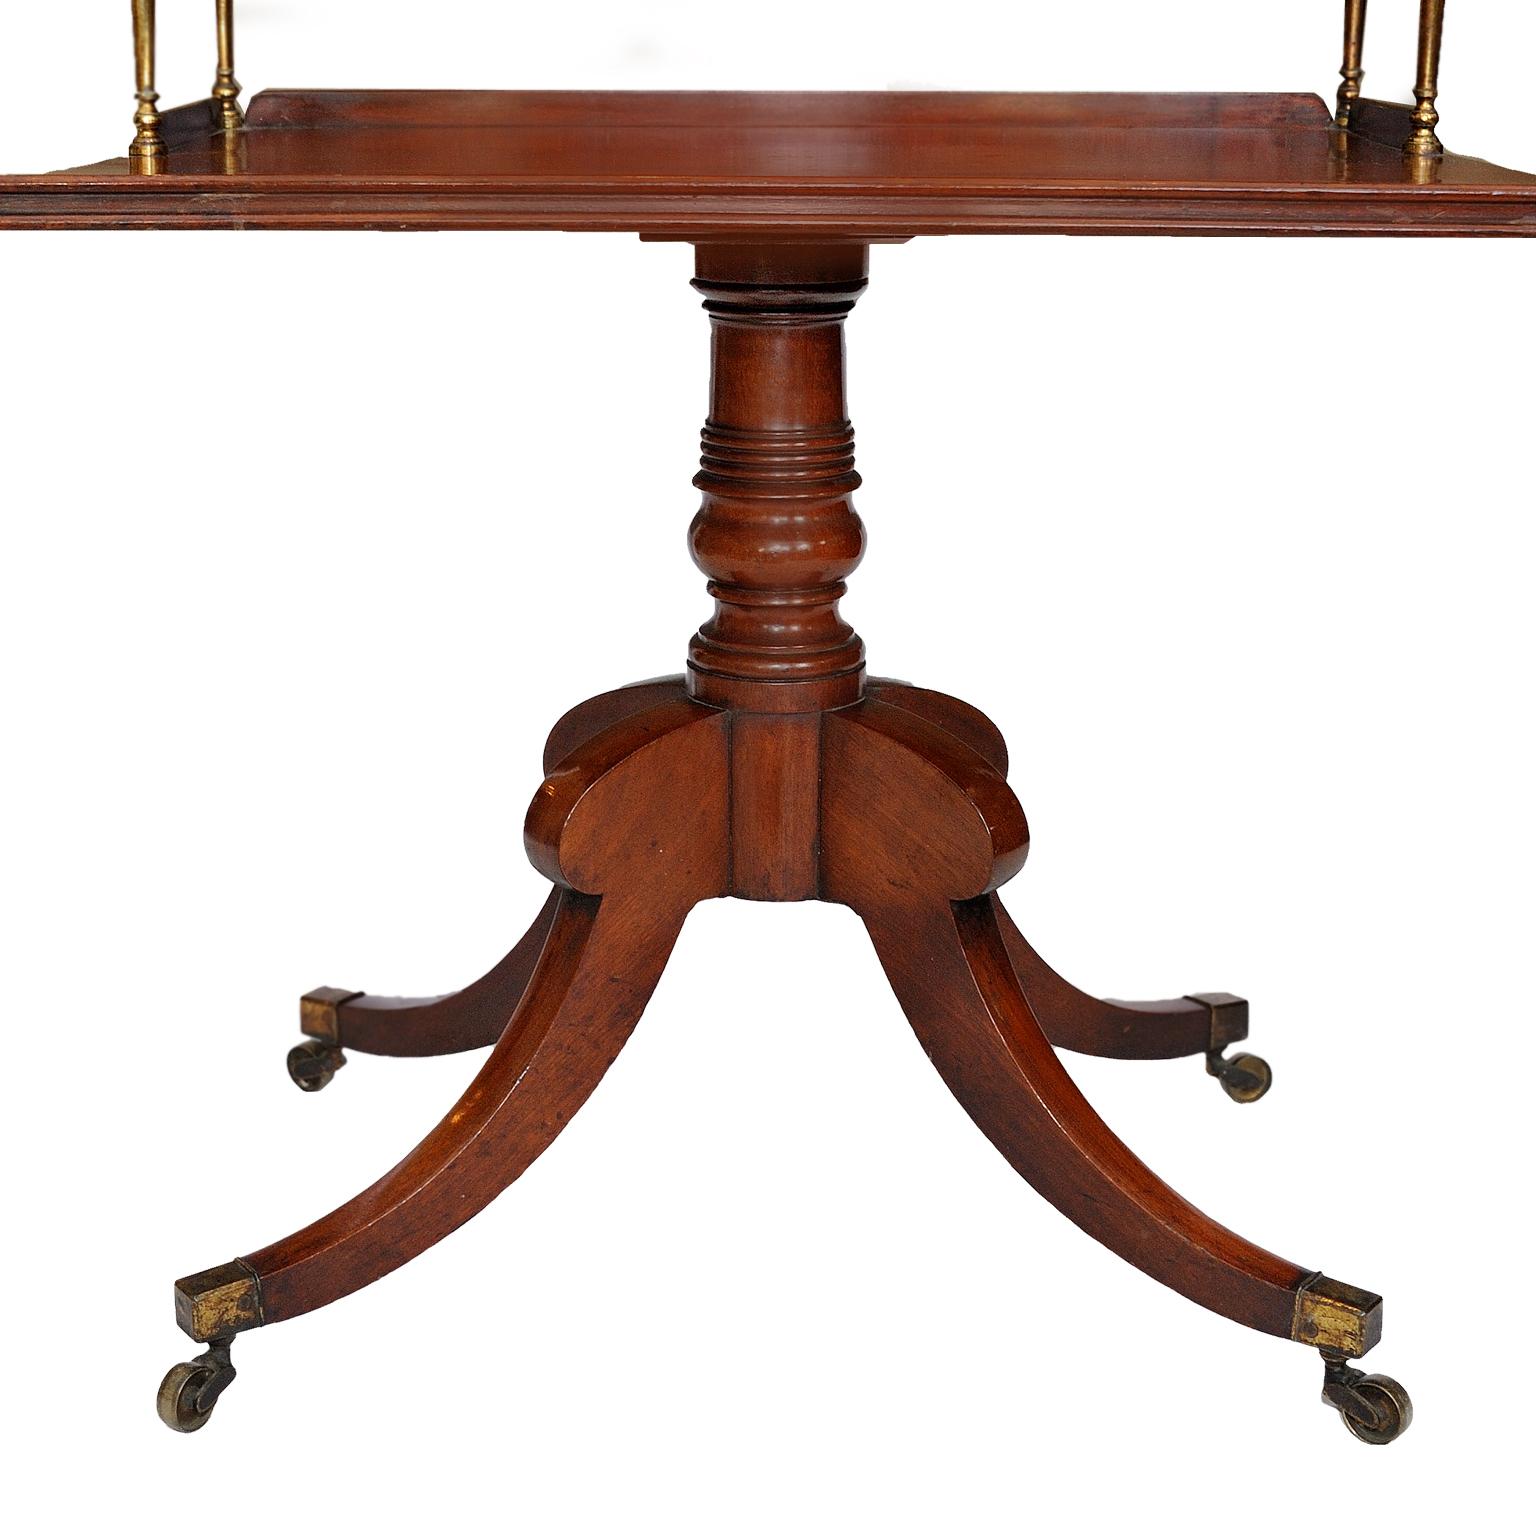 Forged English Regency Mahogany and Gilt Brass Oyster Table, circa 1810 For Sale